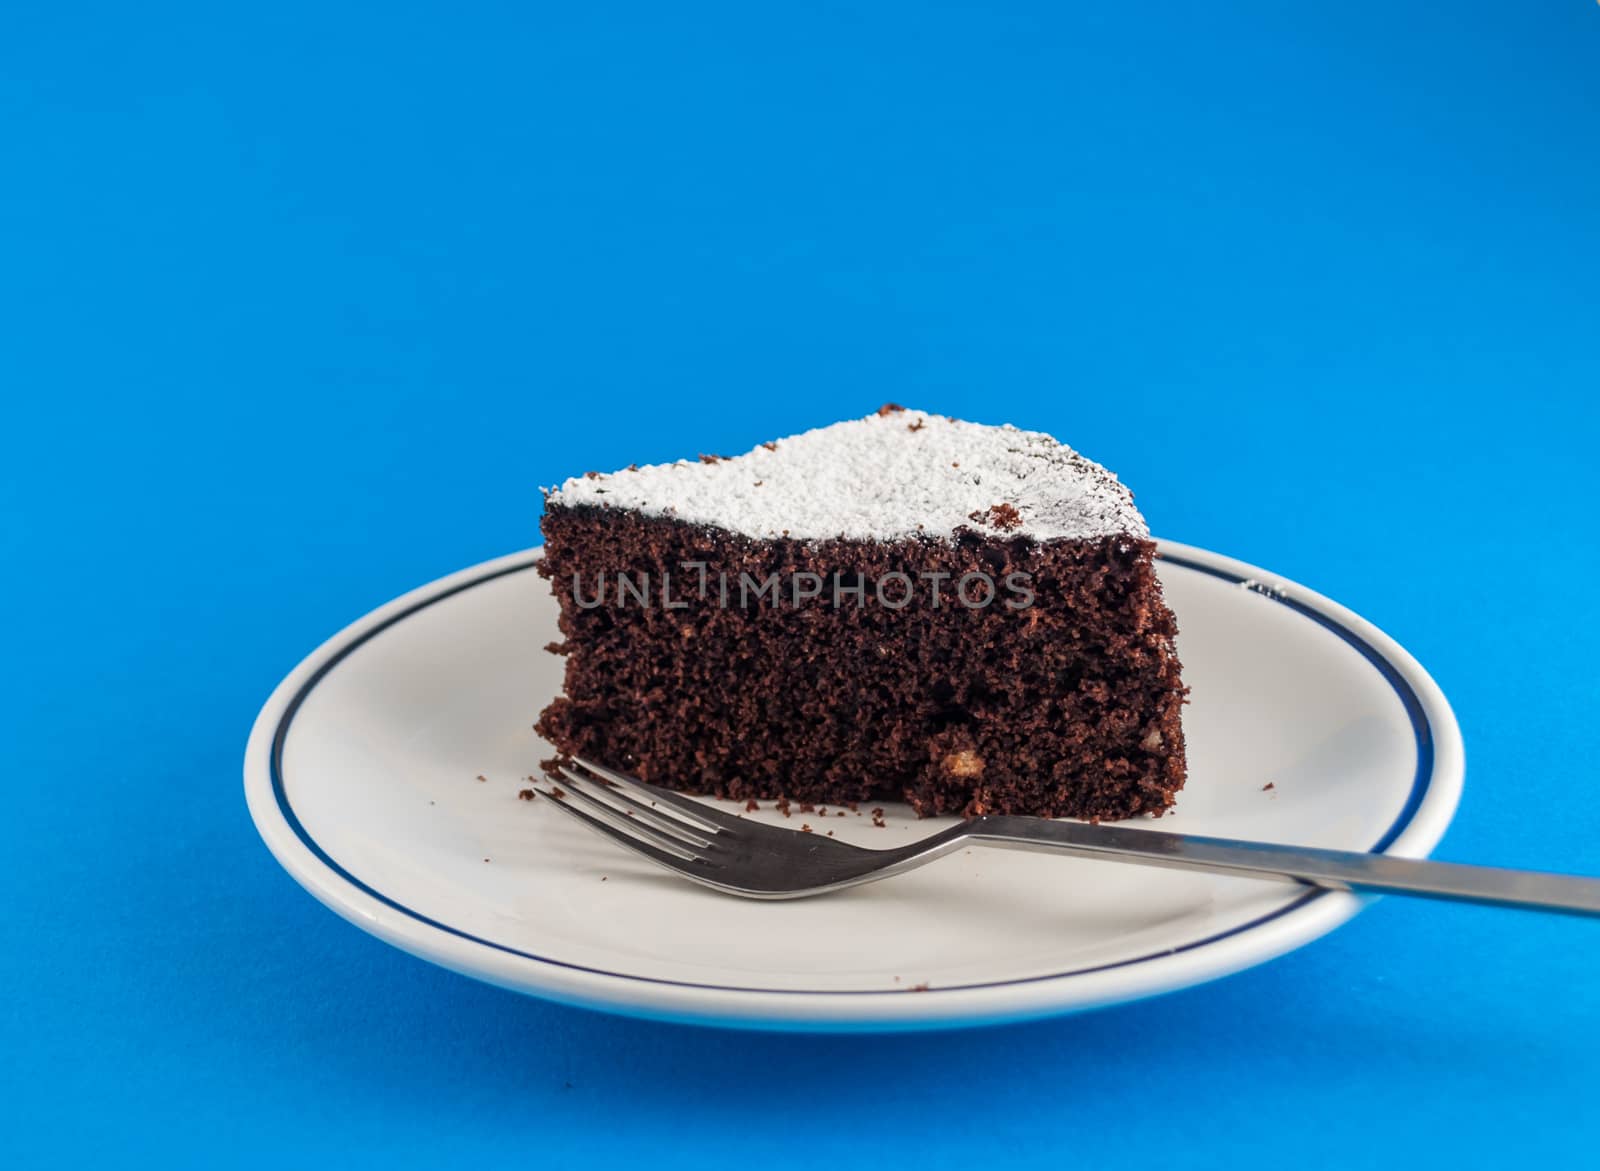 CLoseup of slice of chocolate cake  on colored background